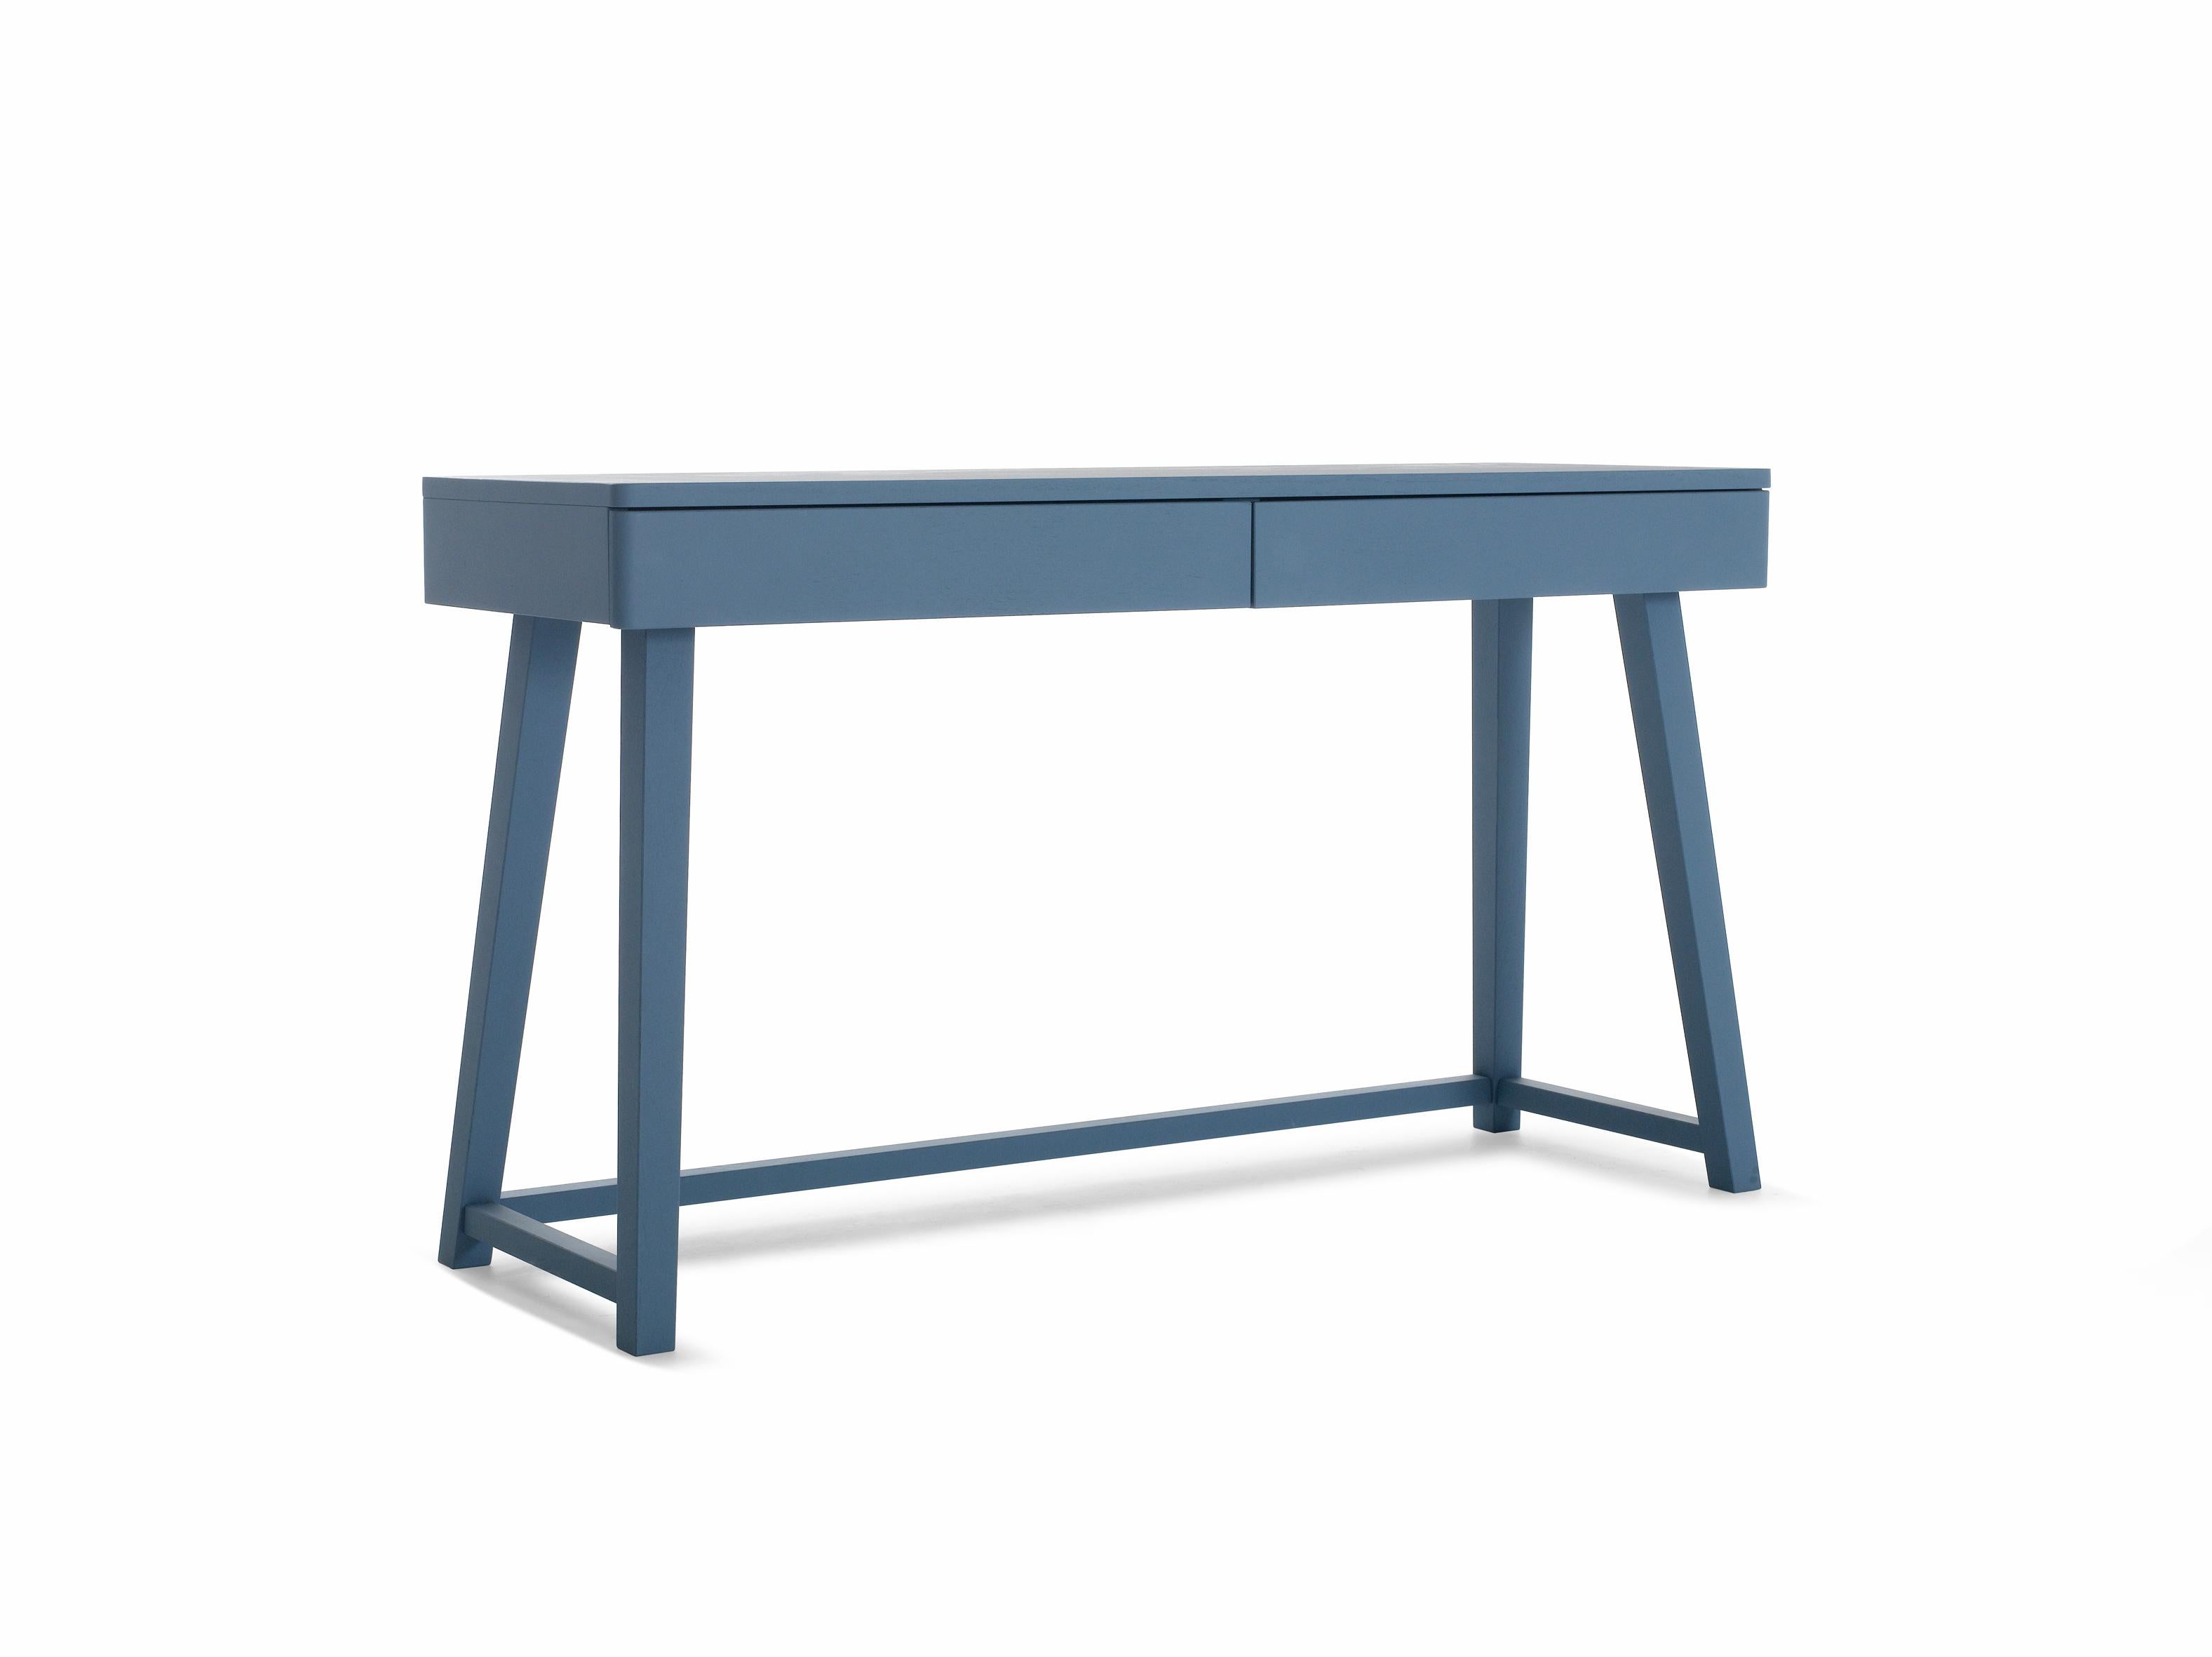 When a house becomes a space for thinking, creating and working, as well as for living, desks take on a whole new dimension: Gray 50 is a small elegant desk, designed in the name of practicality, functionality and a focus on aesthetics. Gray 50,